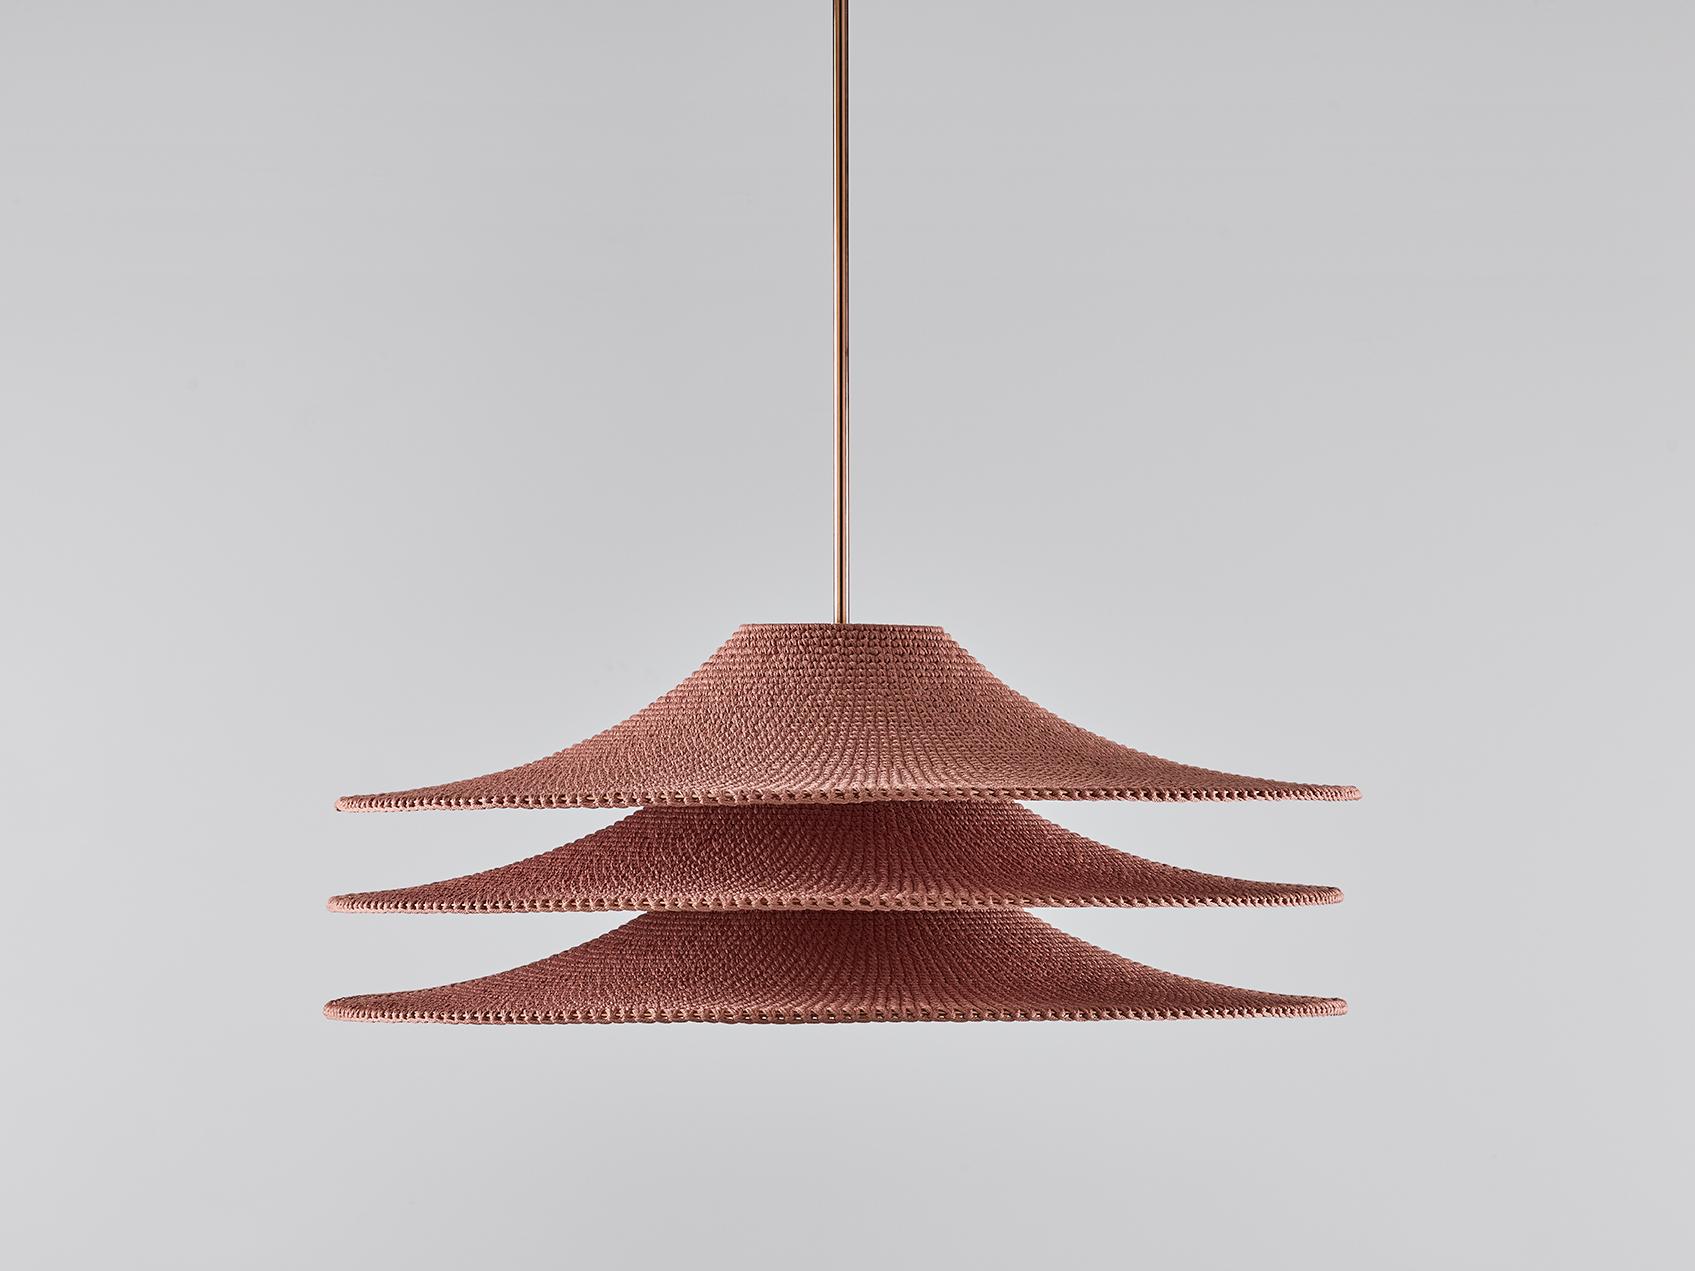 Large simple shade 03 pendant lamp by Naomi Paul
Dimensions: D 80 x H 35 cm
Materials: Metal frame, Egyptian cotton cord.
Color: Dusky Pink.
Available in other colors and in 4 sizes: D 30, D 50, D 60, D 80 cm.
Available in plain, 50/50, trim,